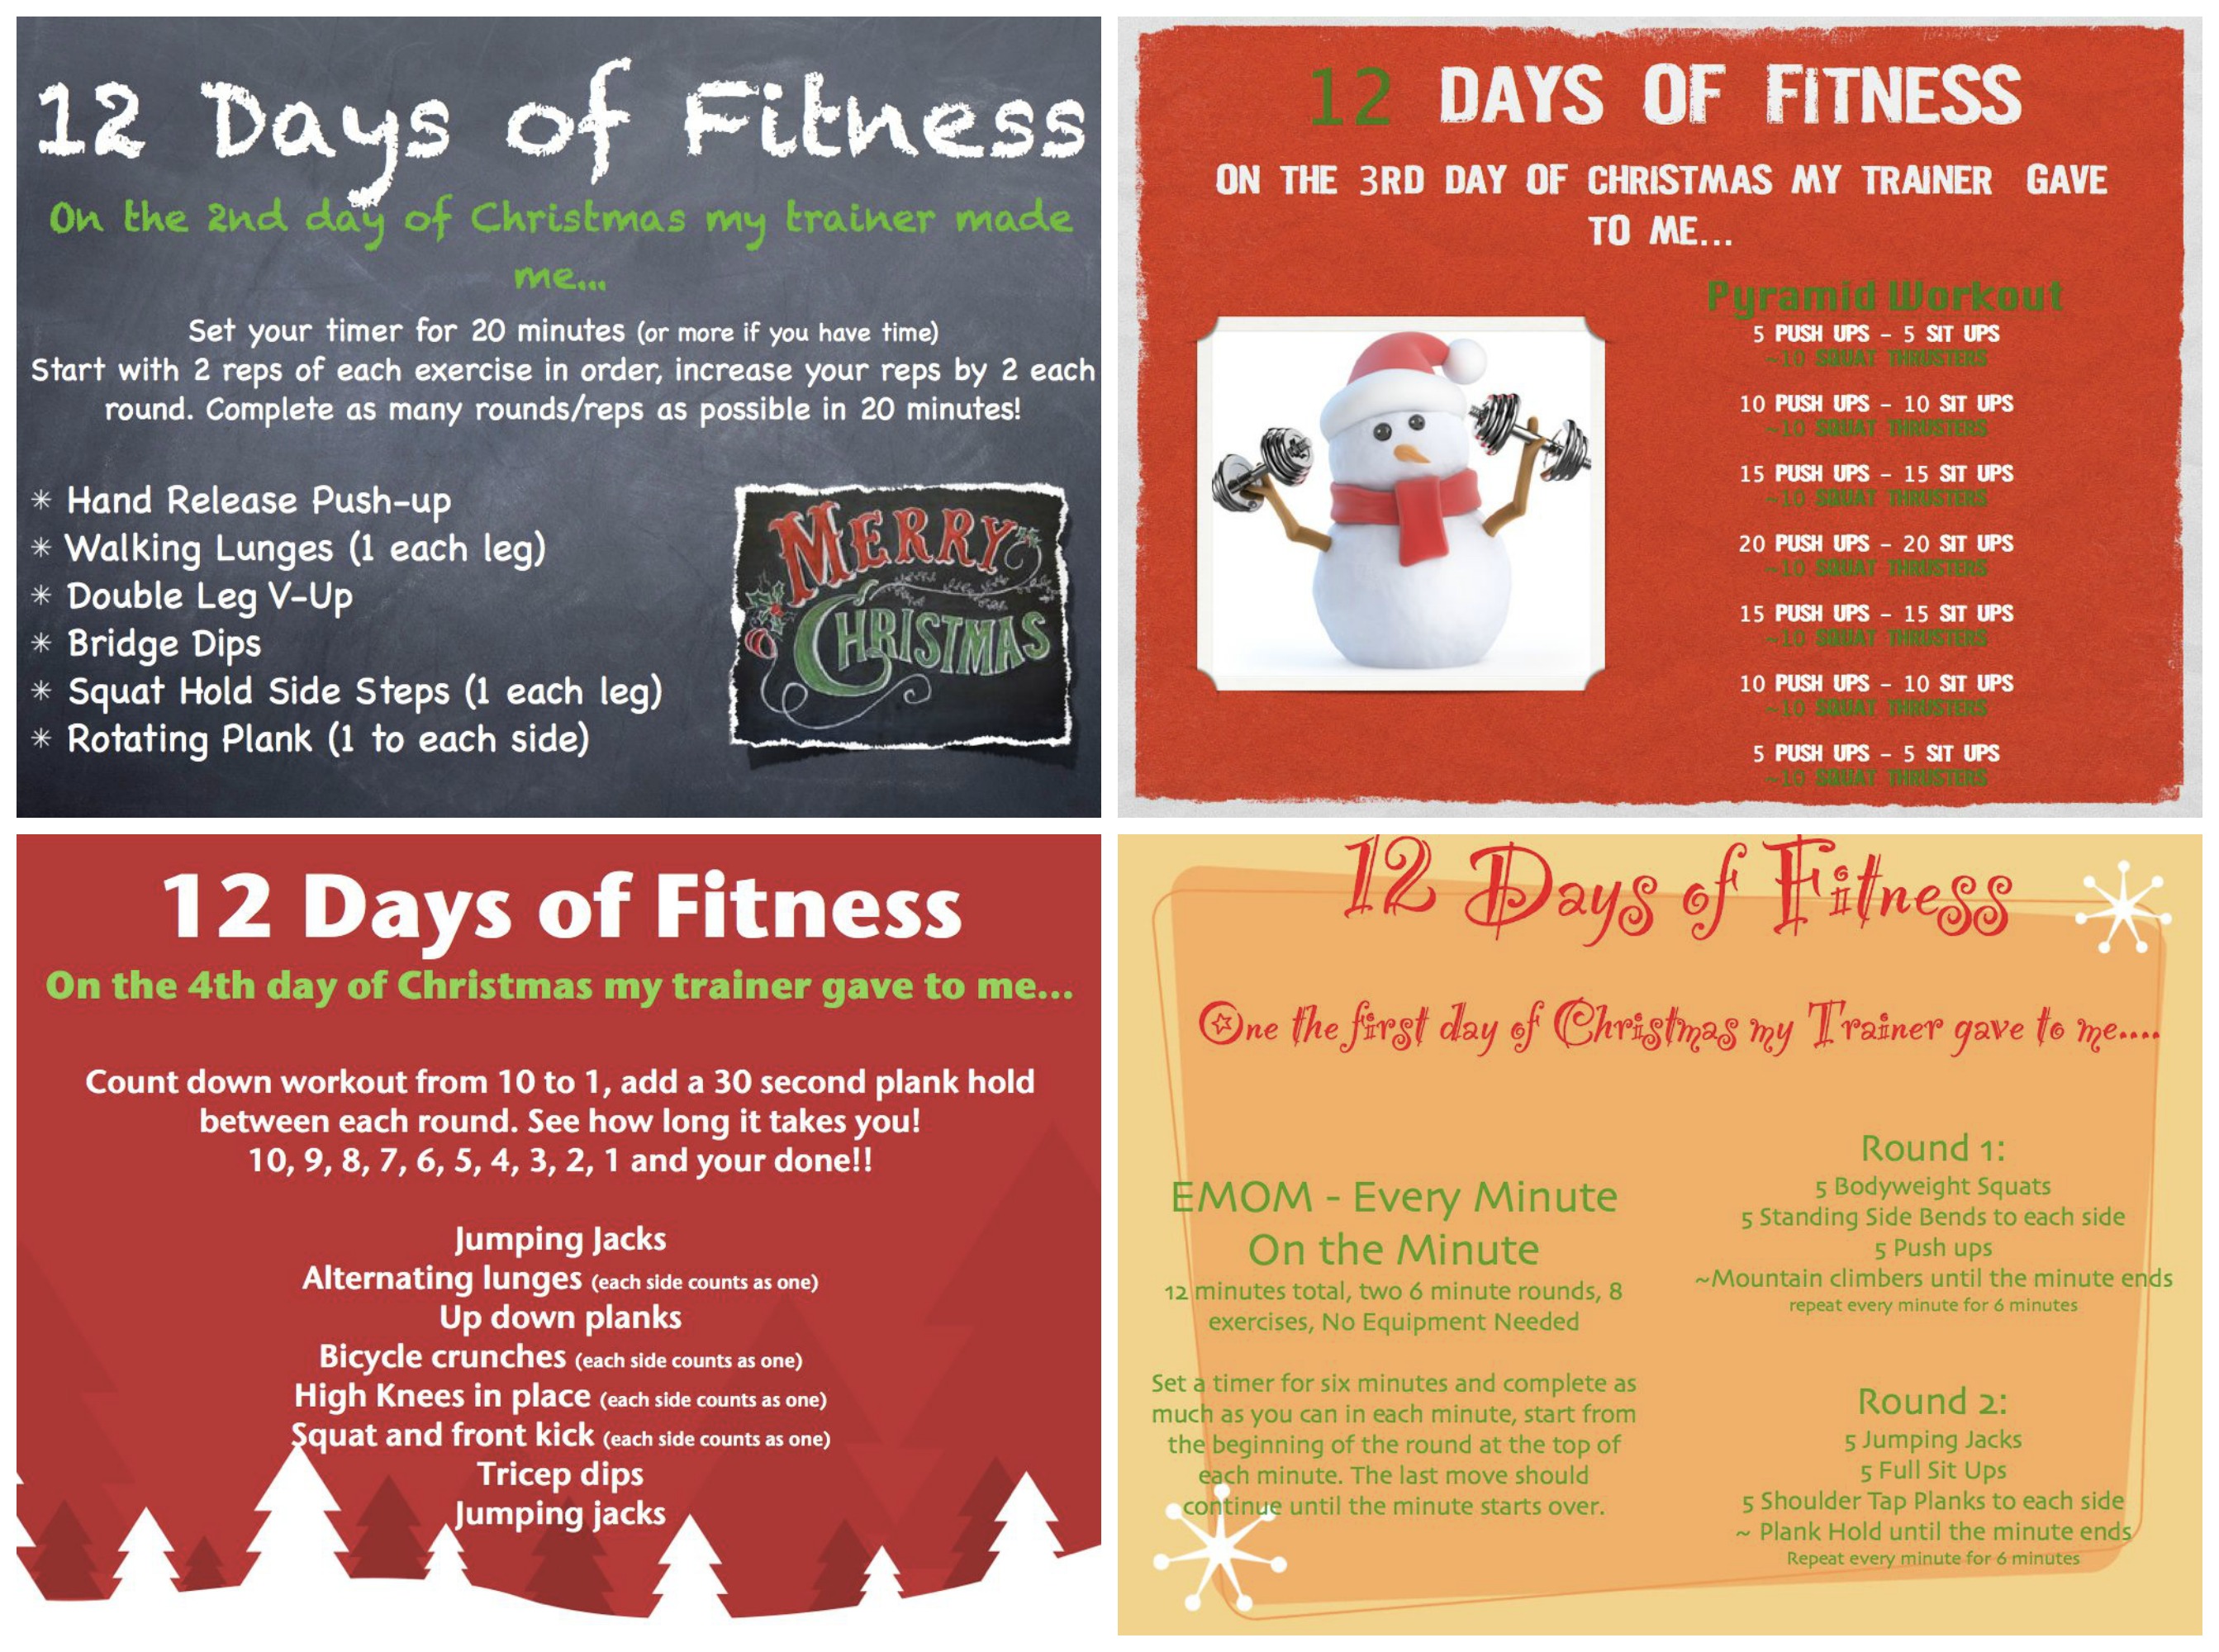 12 Days of Fitness! CHECK it out: https://www.facebook.com/ResurrectionFitness